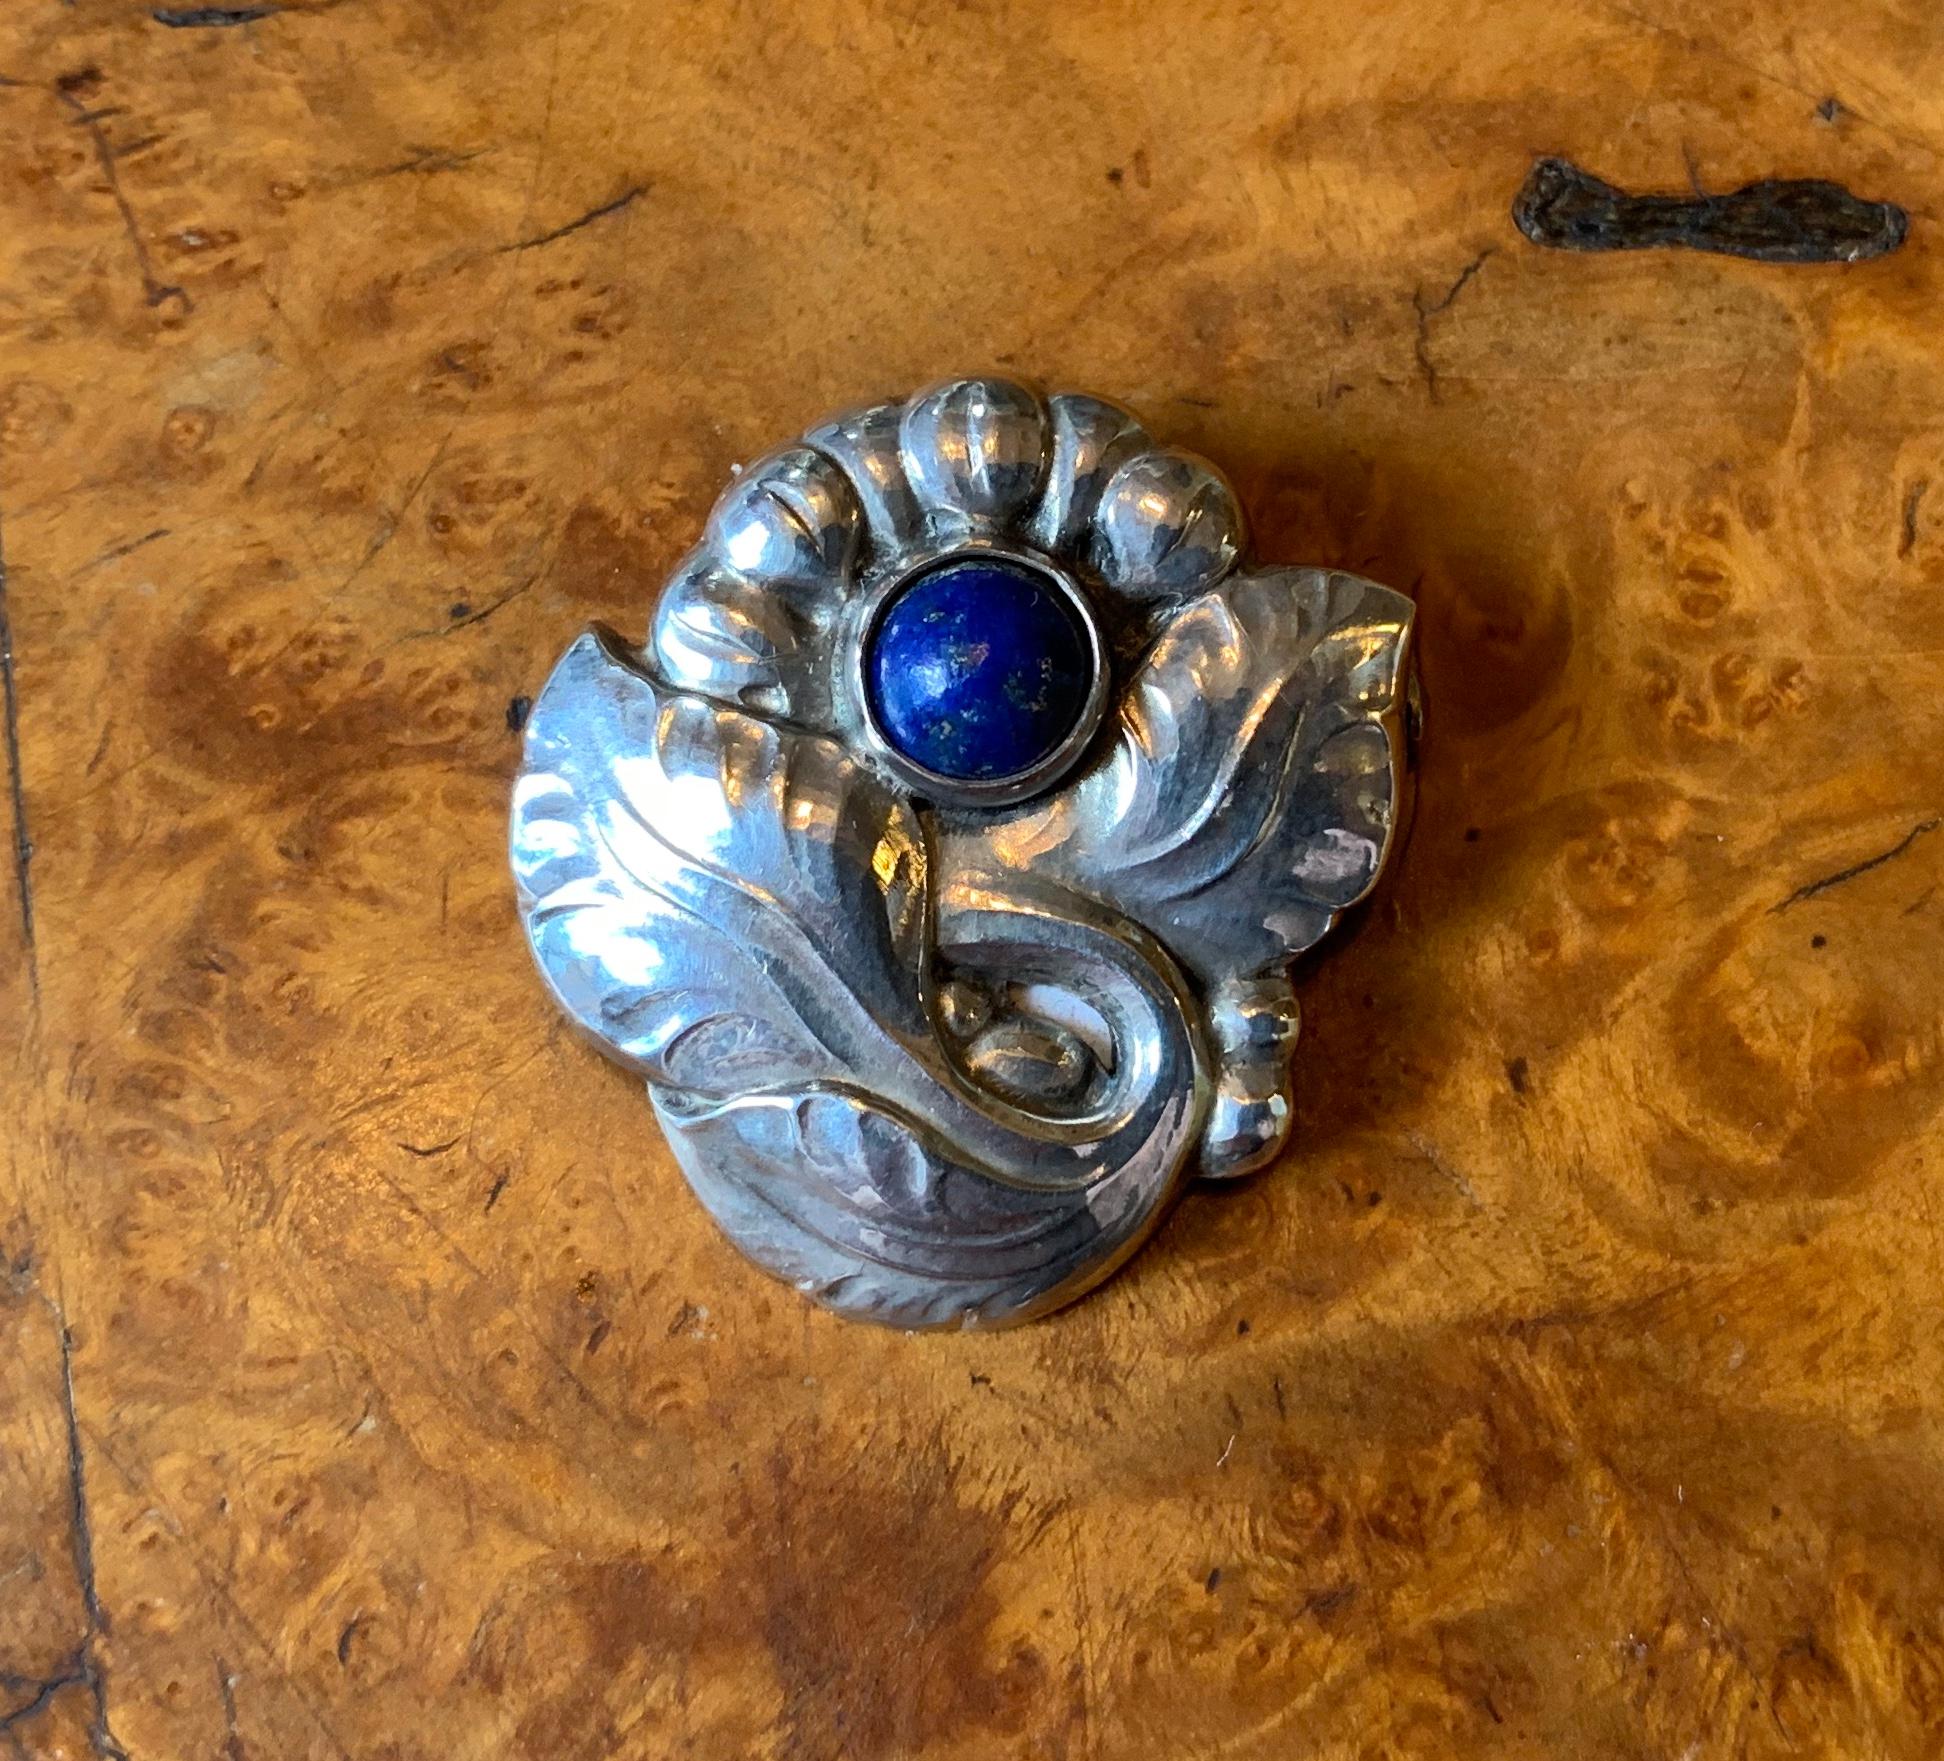 This is the gorgeous early (1933-1944) Georg Jensen sterling silver pin brooch in the form of a flower set with a stunning blue Lapis Lazuli gem. The brooch has the early Jensen mark of JG in a rectangle and is number 71.
This pin is a wonderful